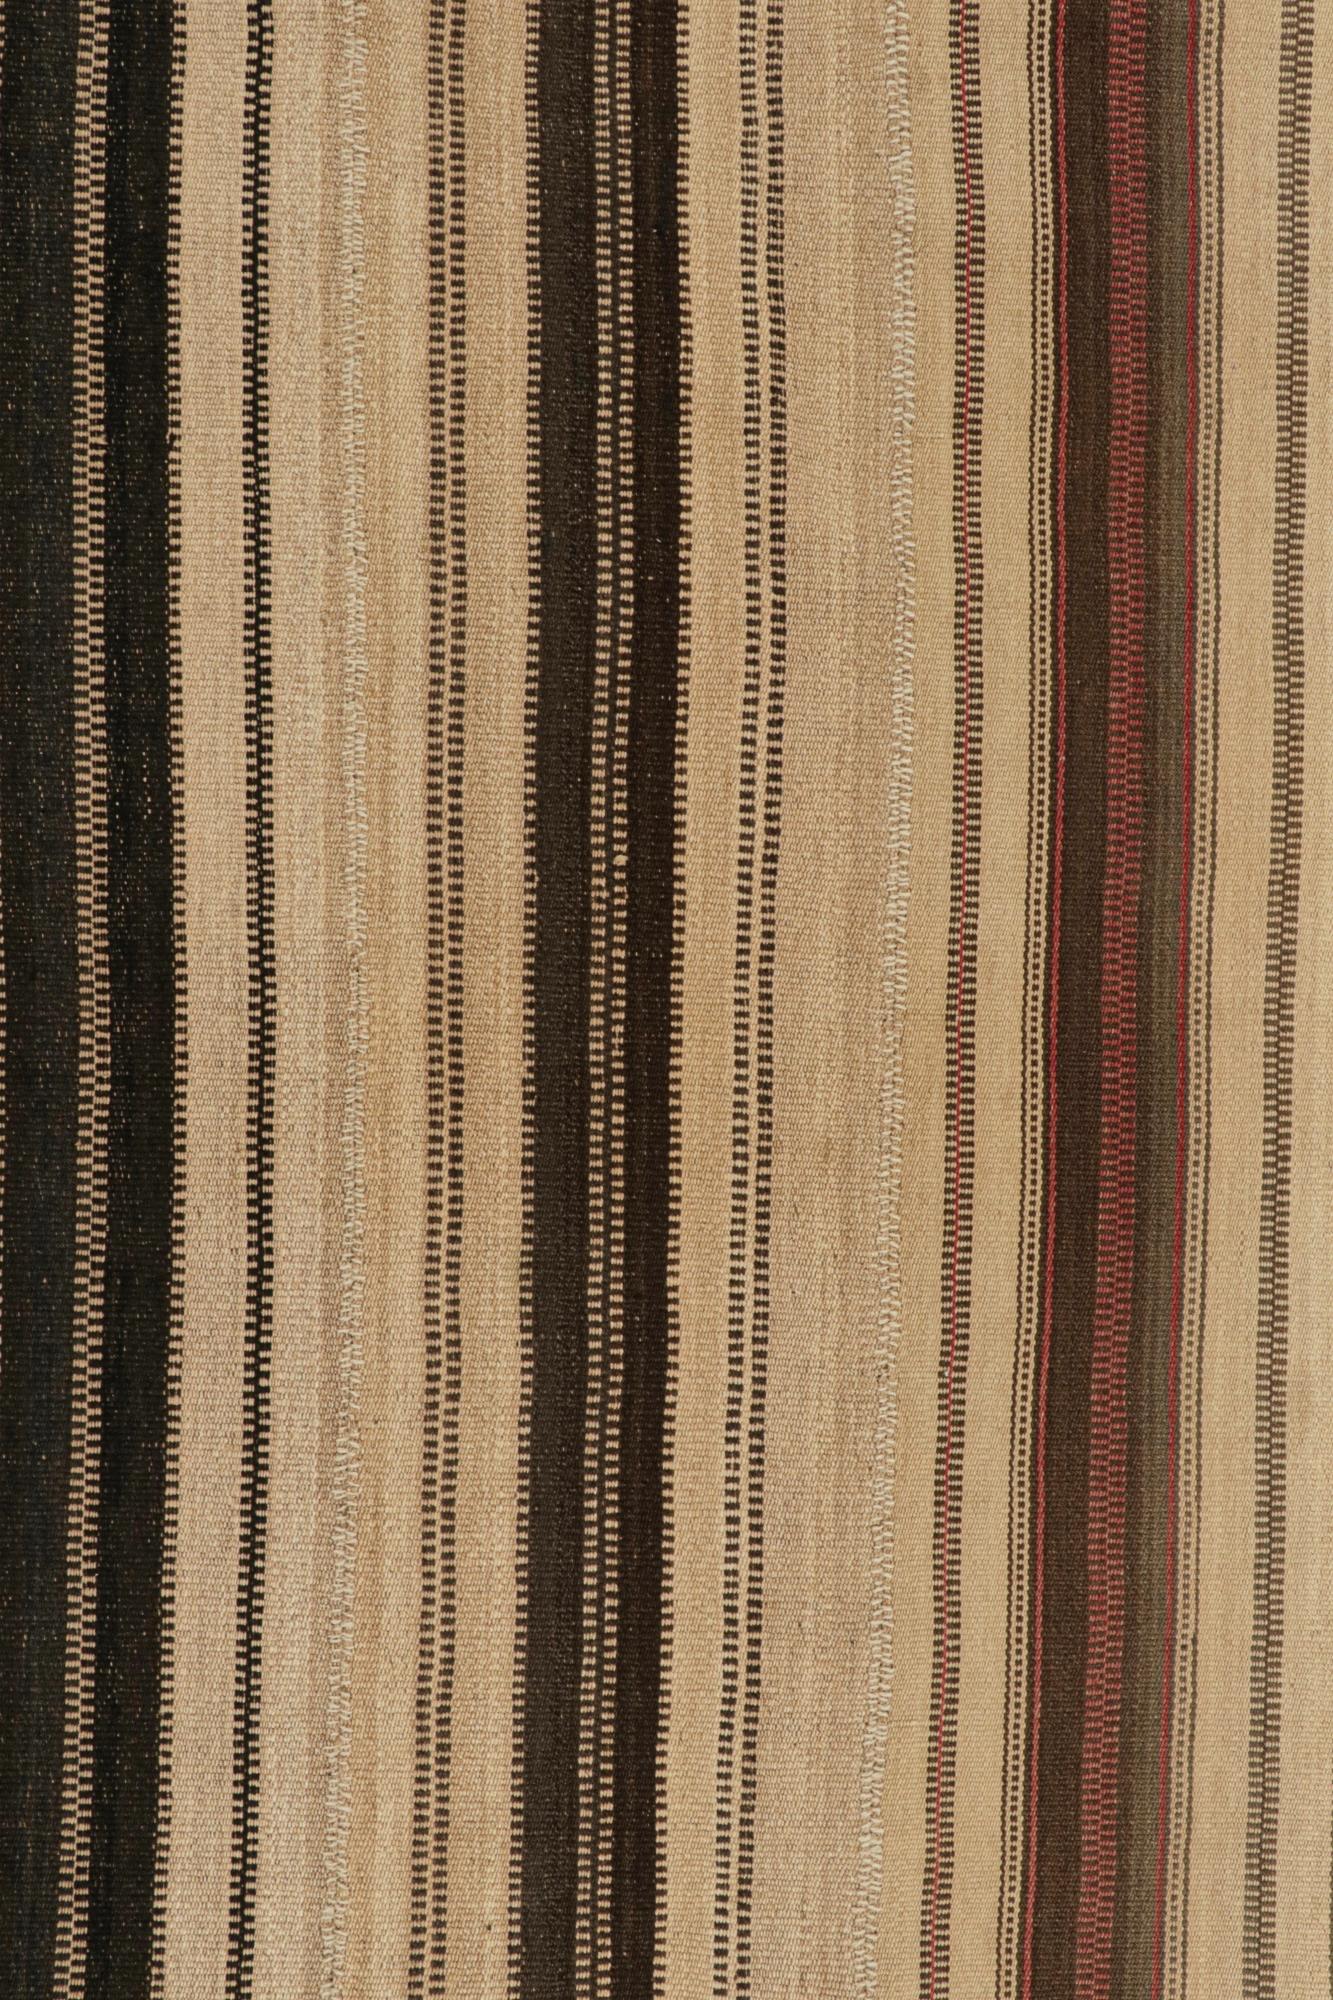 Mid-20th Century Vintage Persian Kilim in Beige & Brown Stripes in Panel Style For Sale